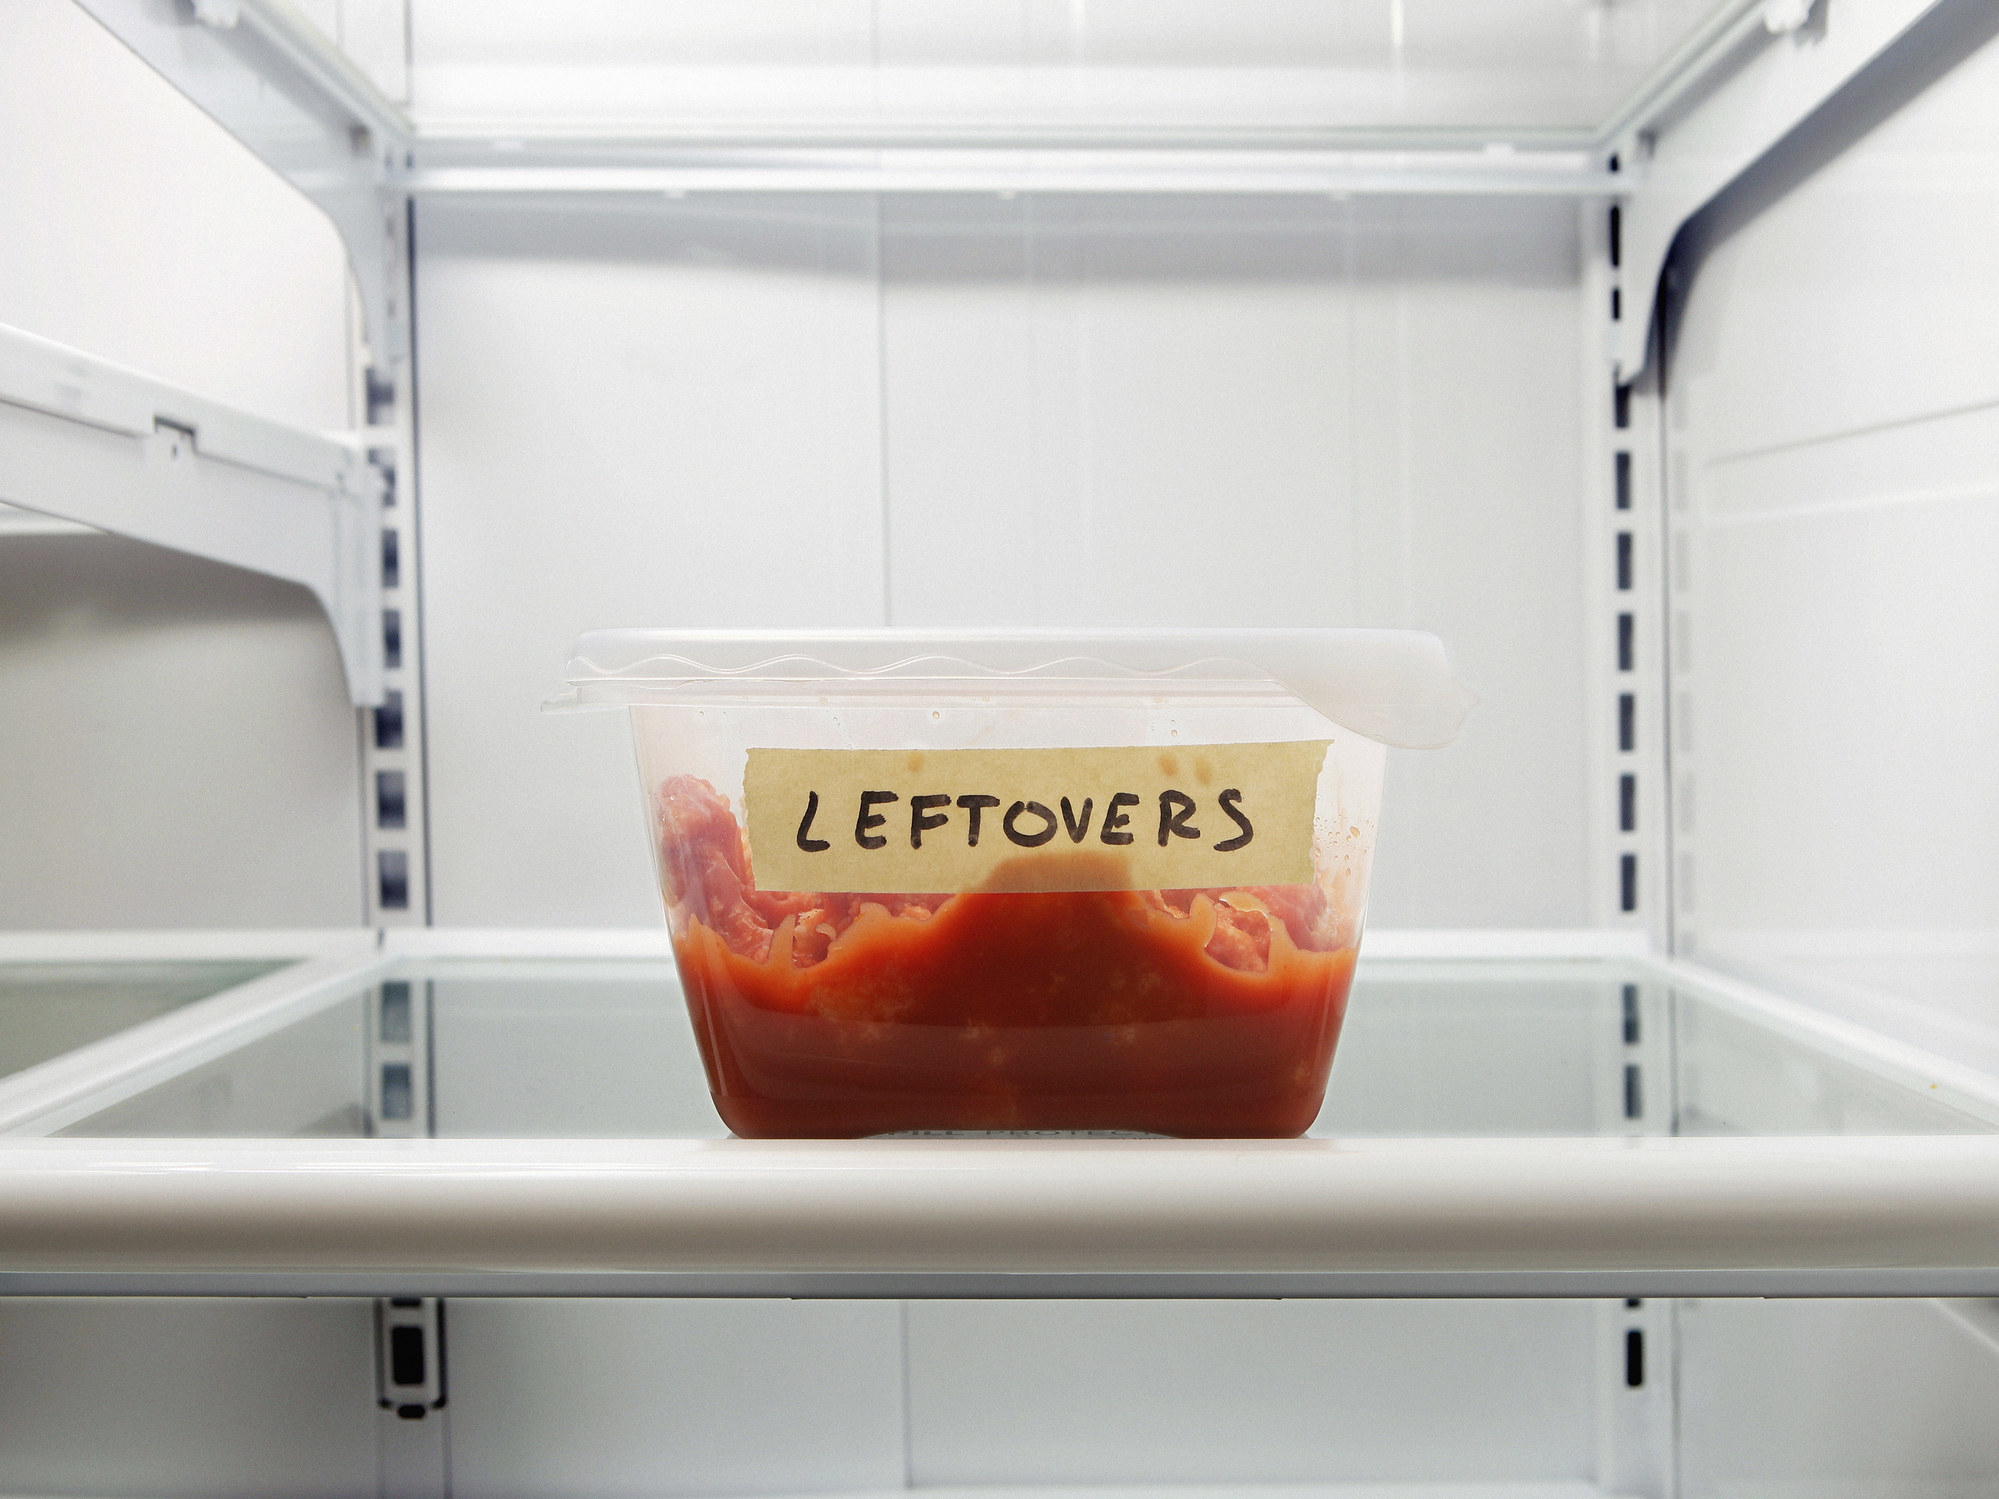 a container marked leftovers in a fridge